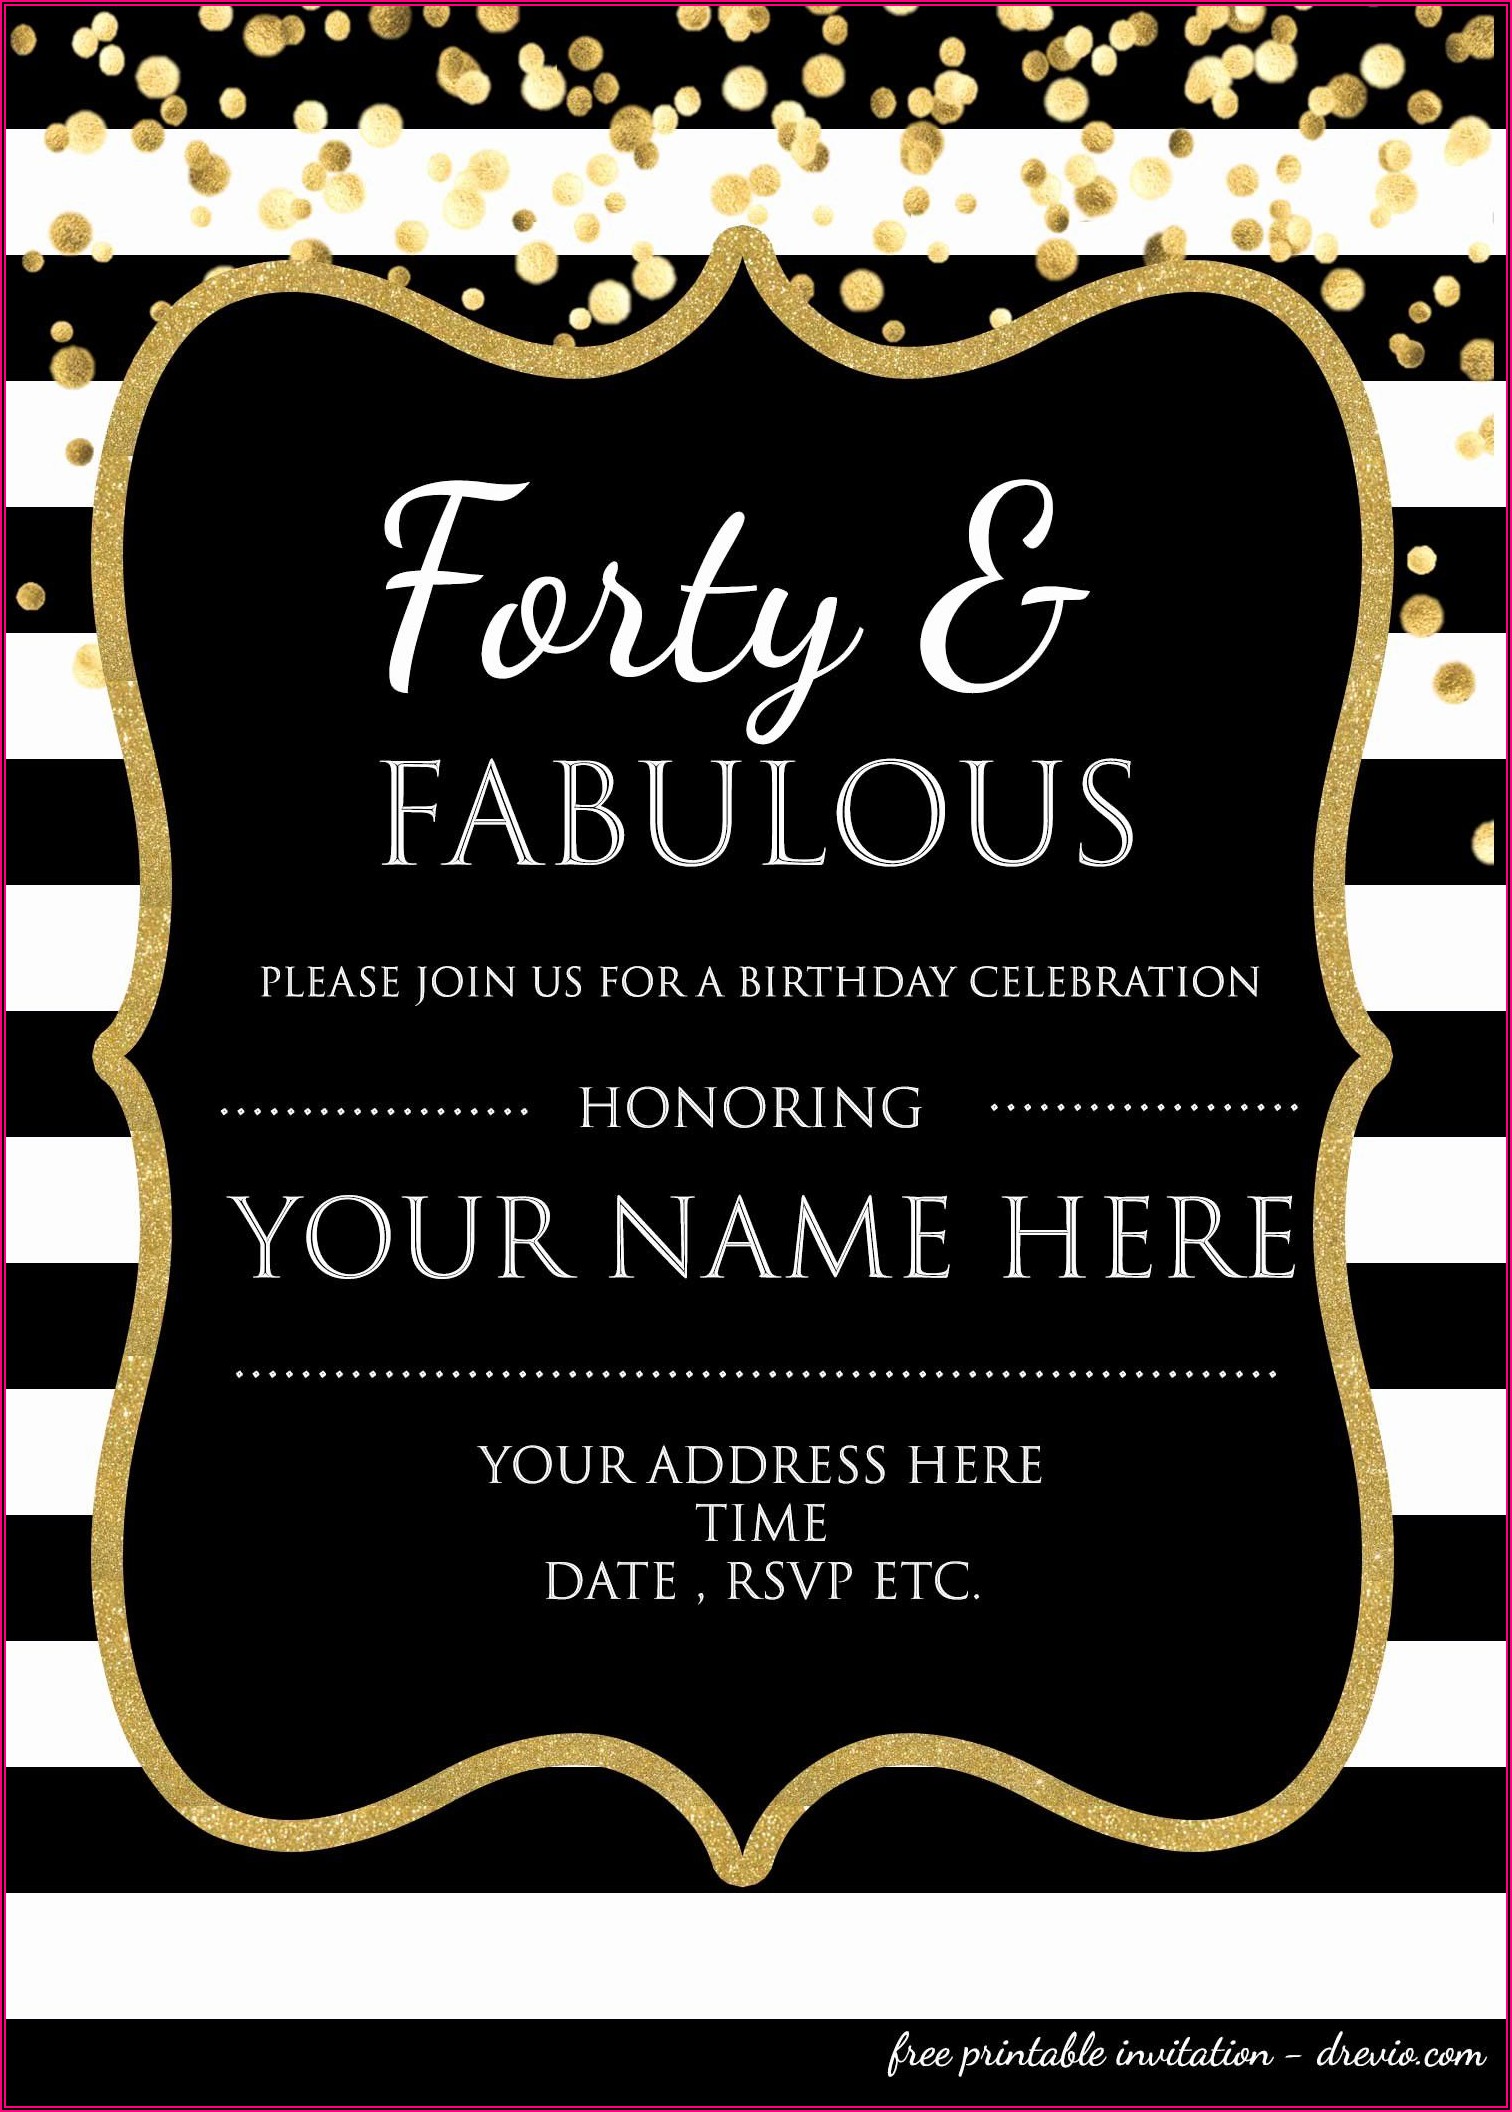 40th-wedding-anniversary-invitations-templates-free-download-template